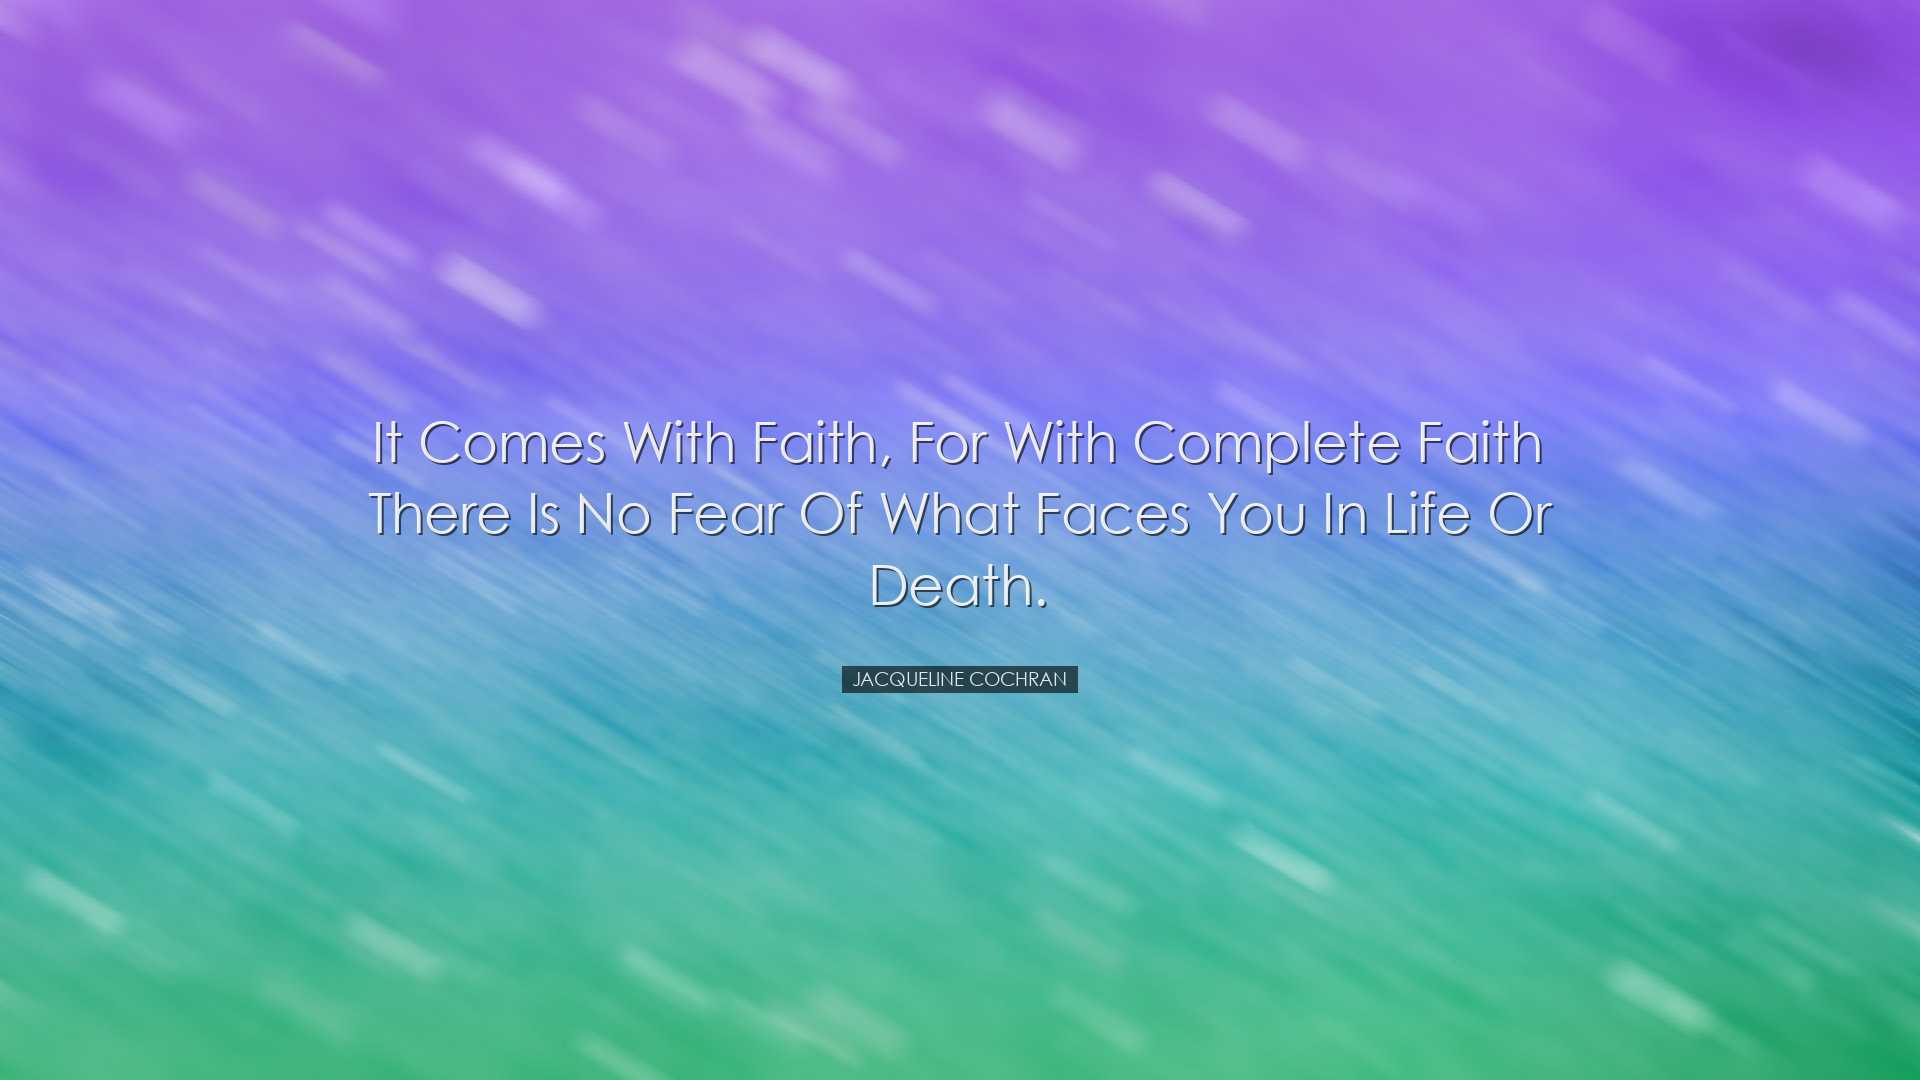 It comes with faith, for with complete faith there is no fear of w